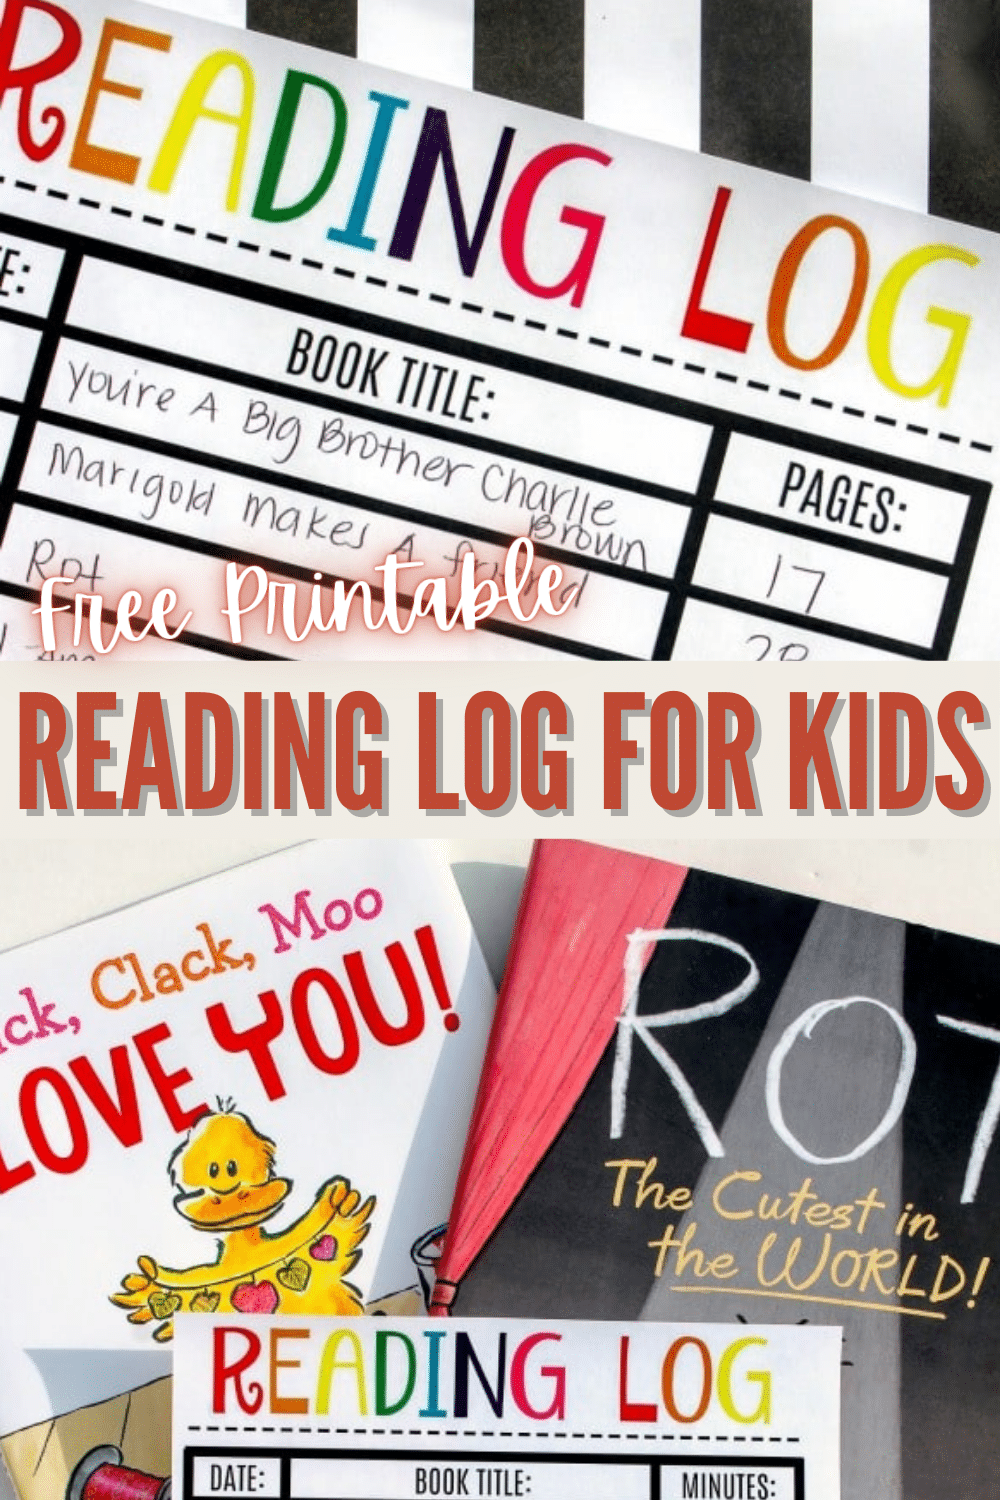 Three different printable reading logs to help motivate your child to read. Track books, pages read or minutes read. #readinglog #reading #forkids #printable via @wondermomwannab